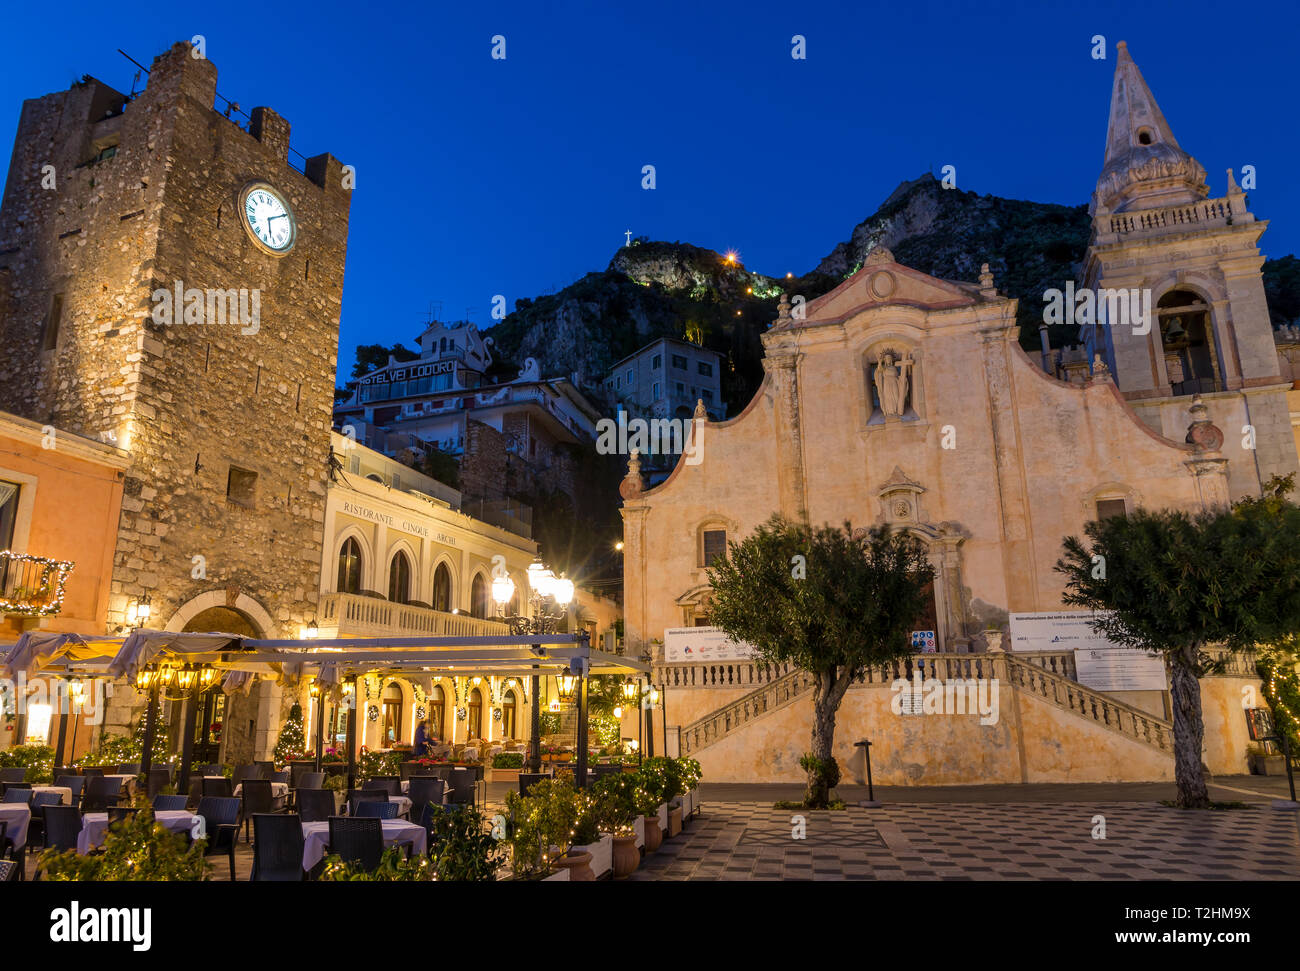 San Guiseppe church and the clock tower gate at Piazza IX Aprile during blue hour, Taormina, Sicily, Italy, Europe Stock Photo